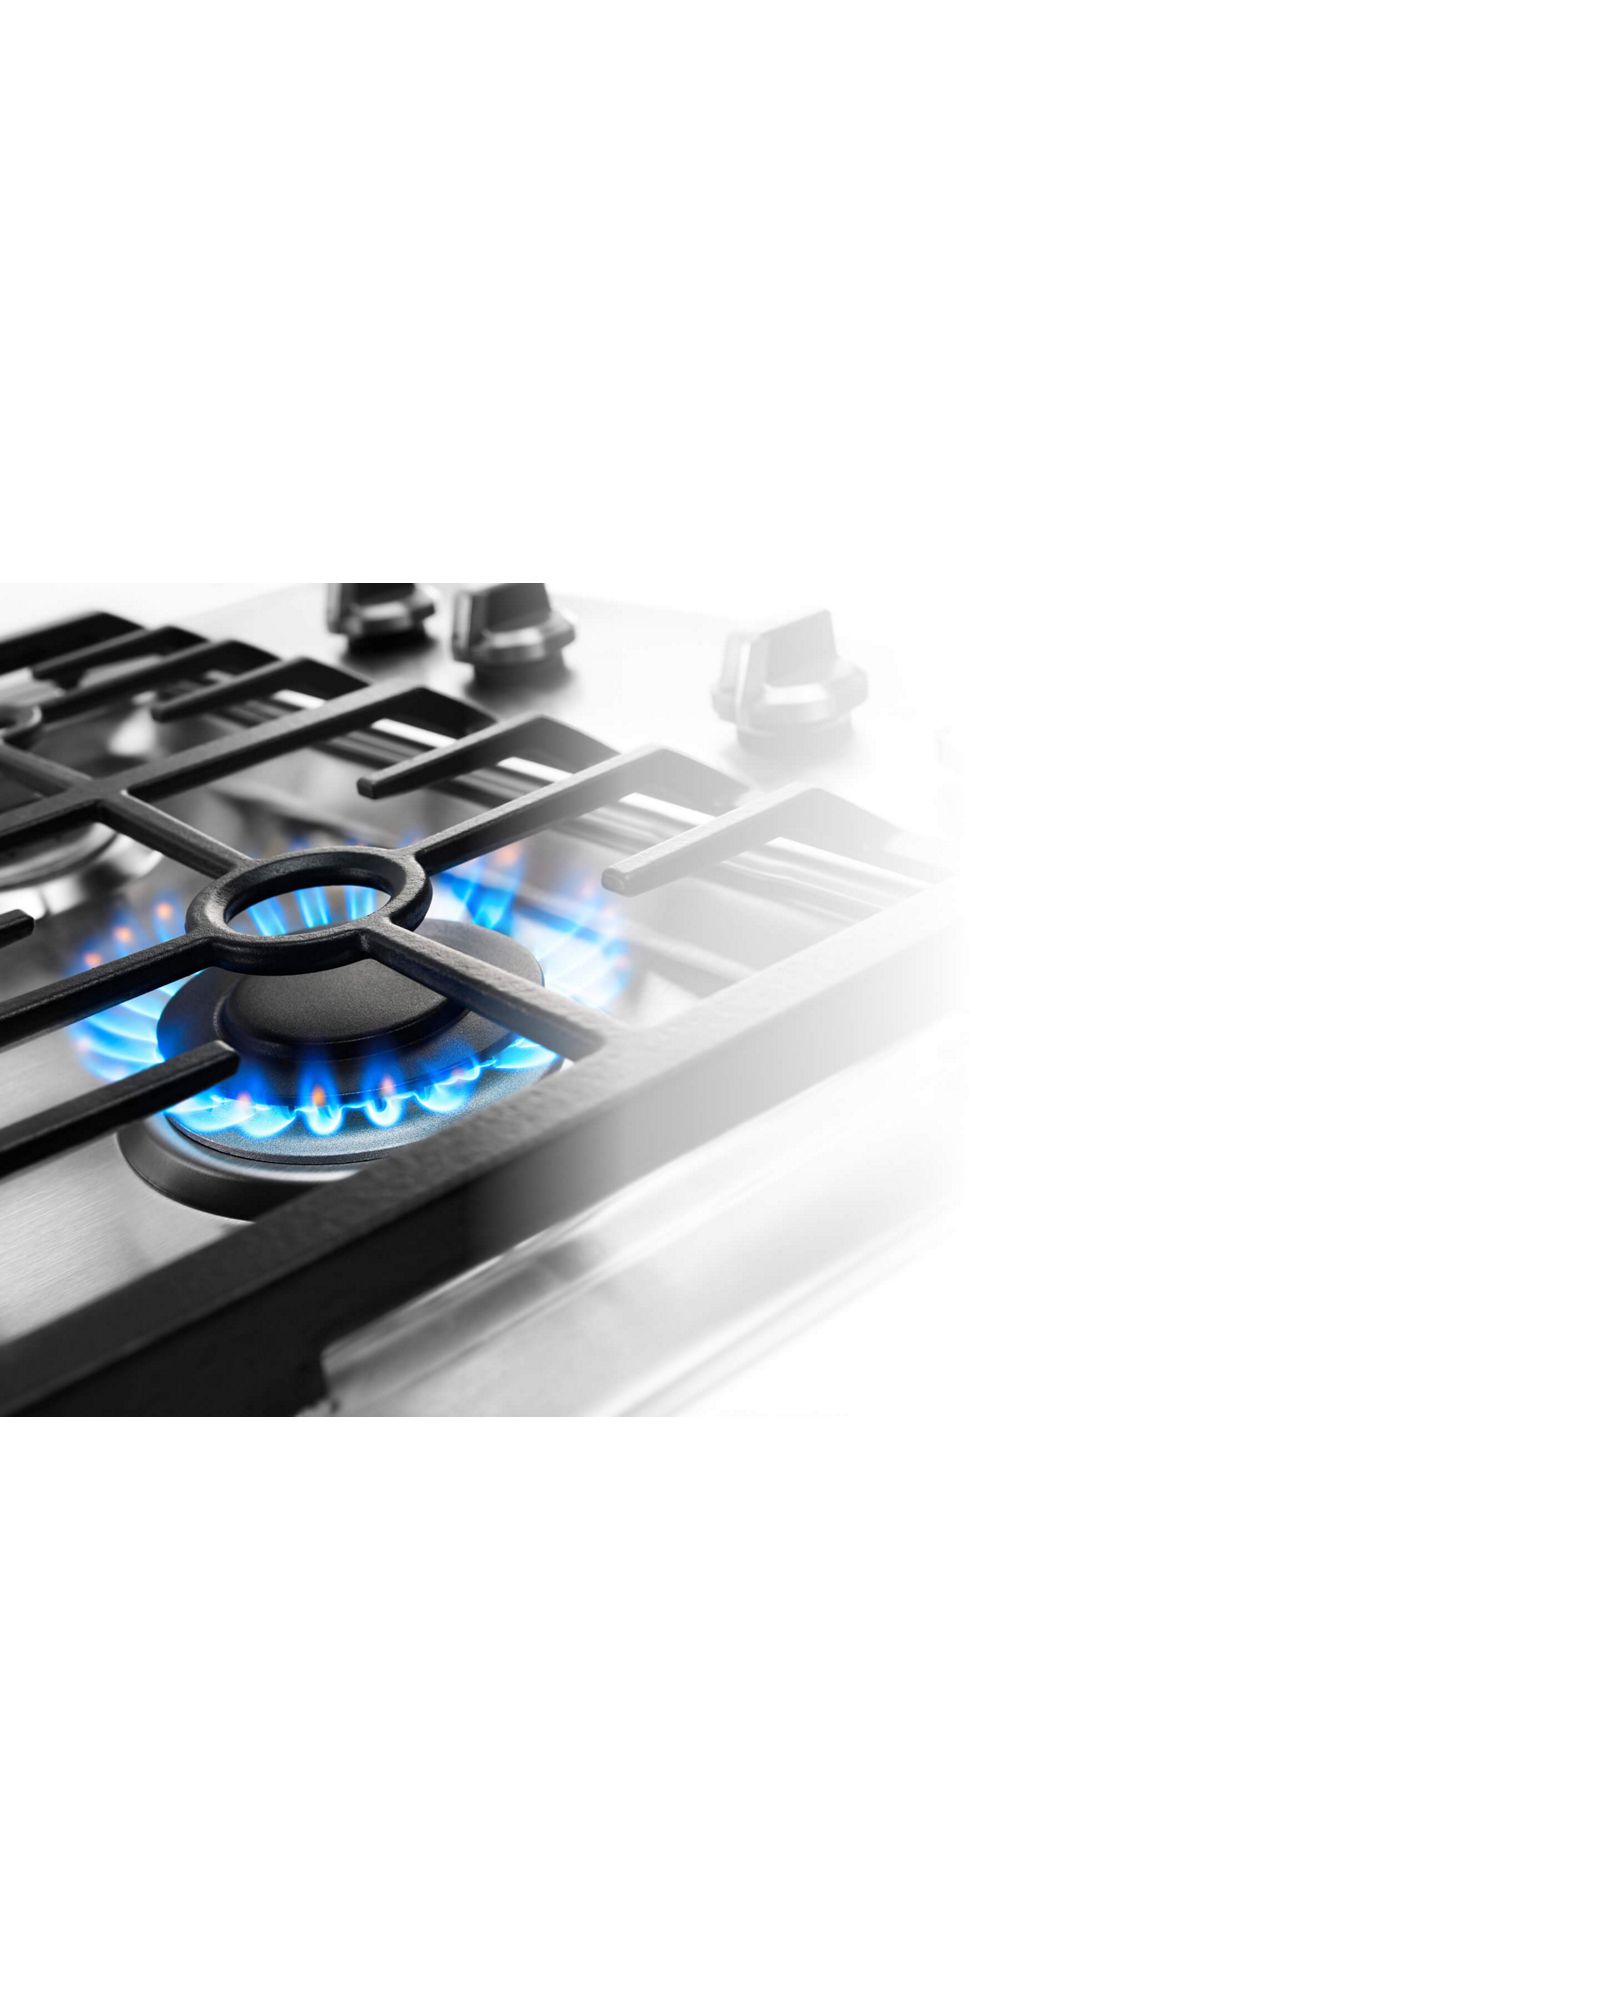 Maytag® Cooktop - Feature Spotlight: Reversible grill and griddle